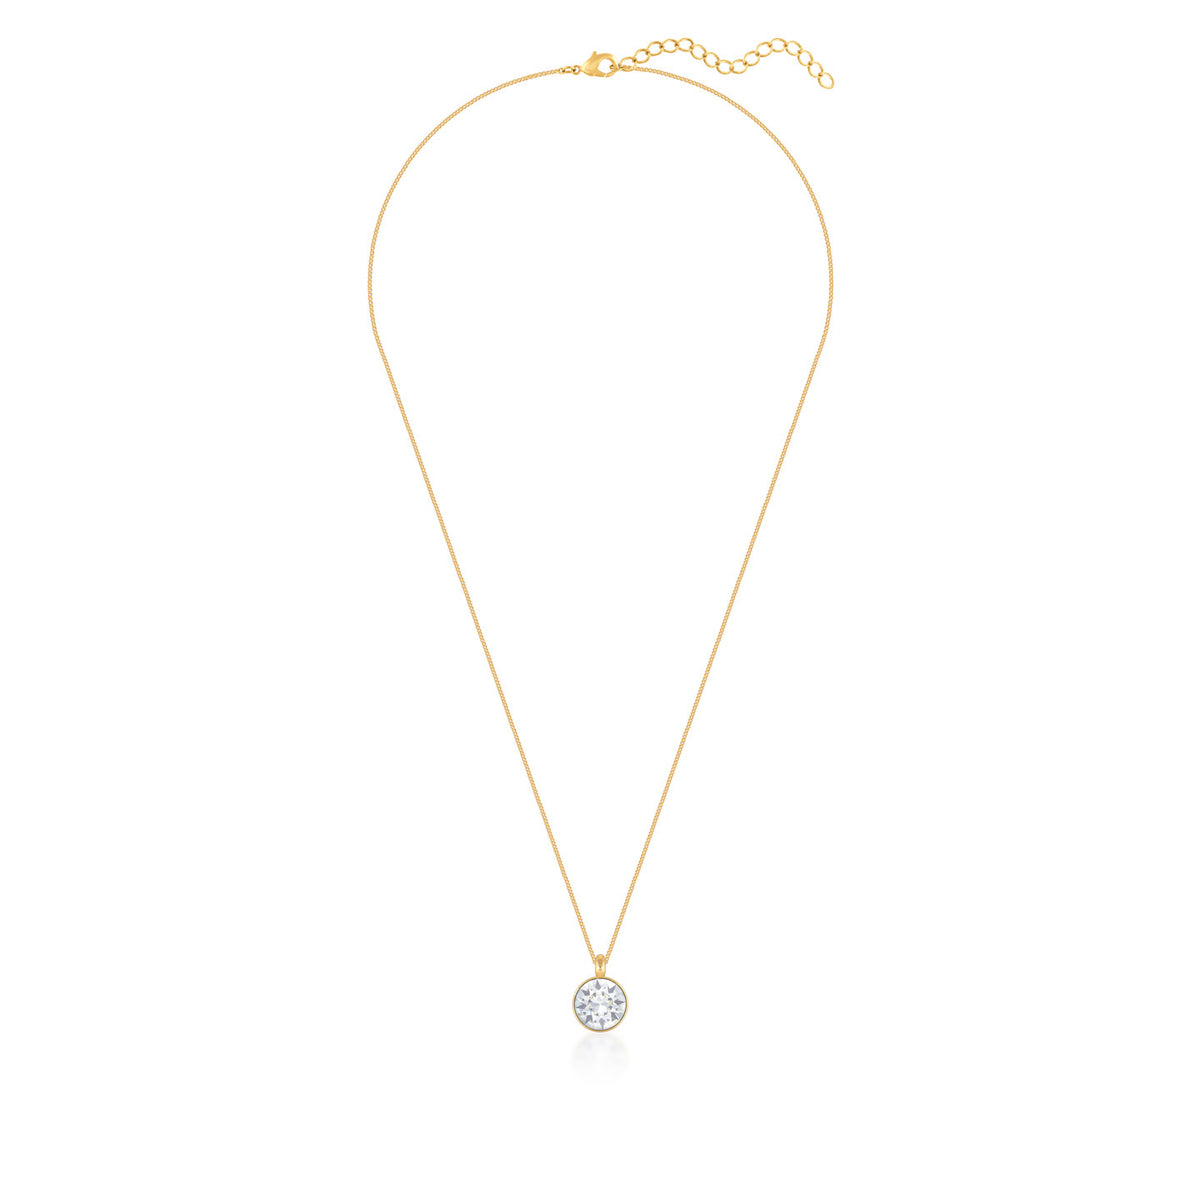 Bella Pendant Necklace with White Clear Round Crystals from Swarovski Gold Plated - Ed Heart